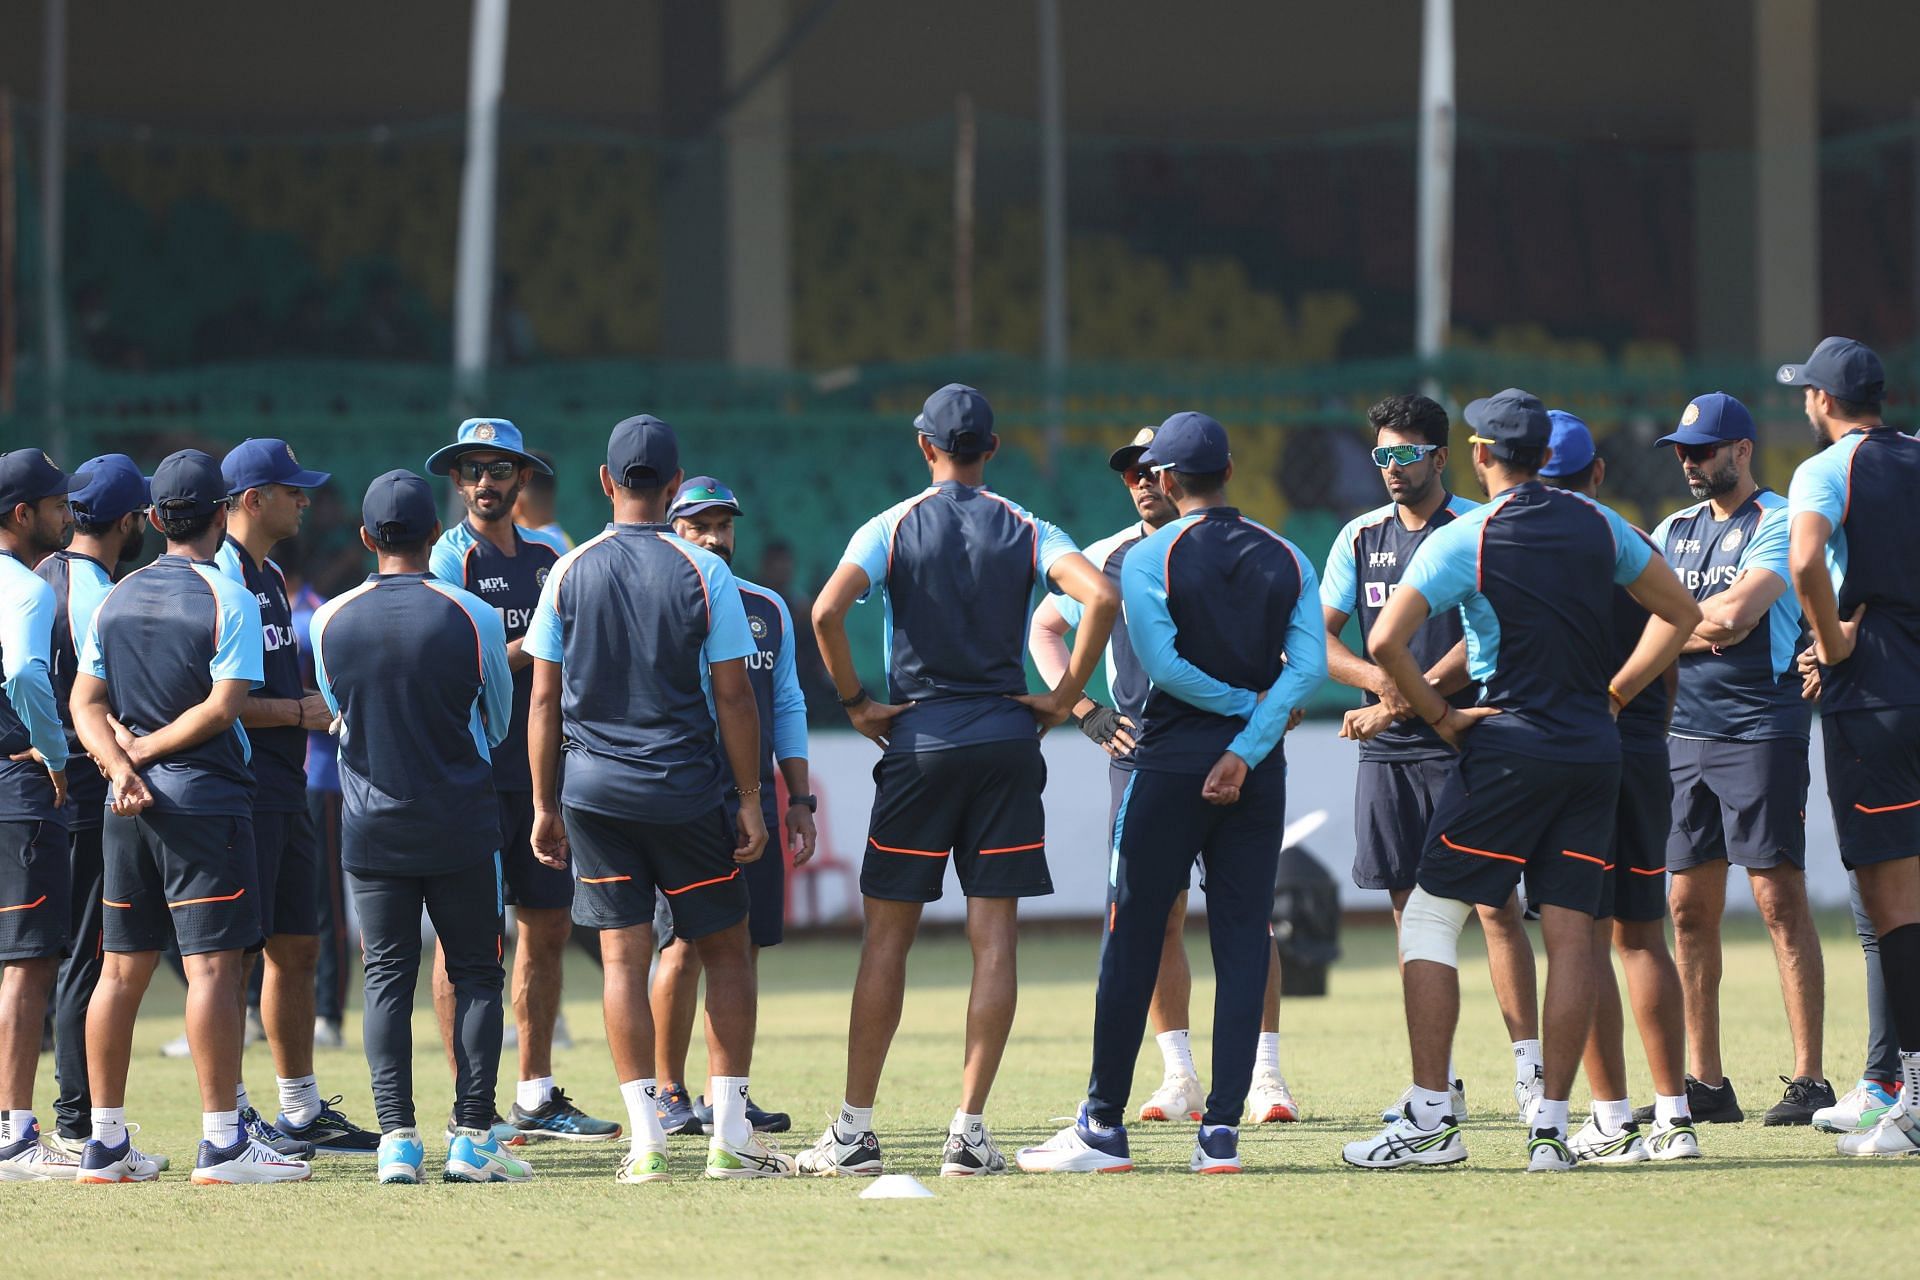 Team India players during a practice session in Kanpur. (PC: BCCI)